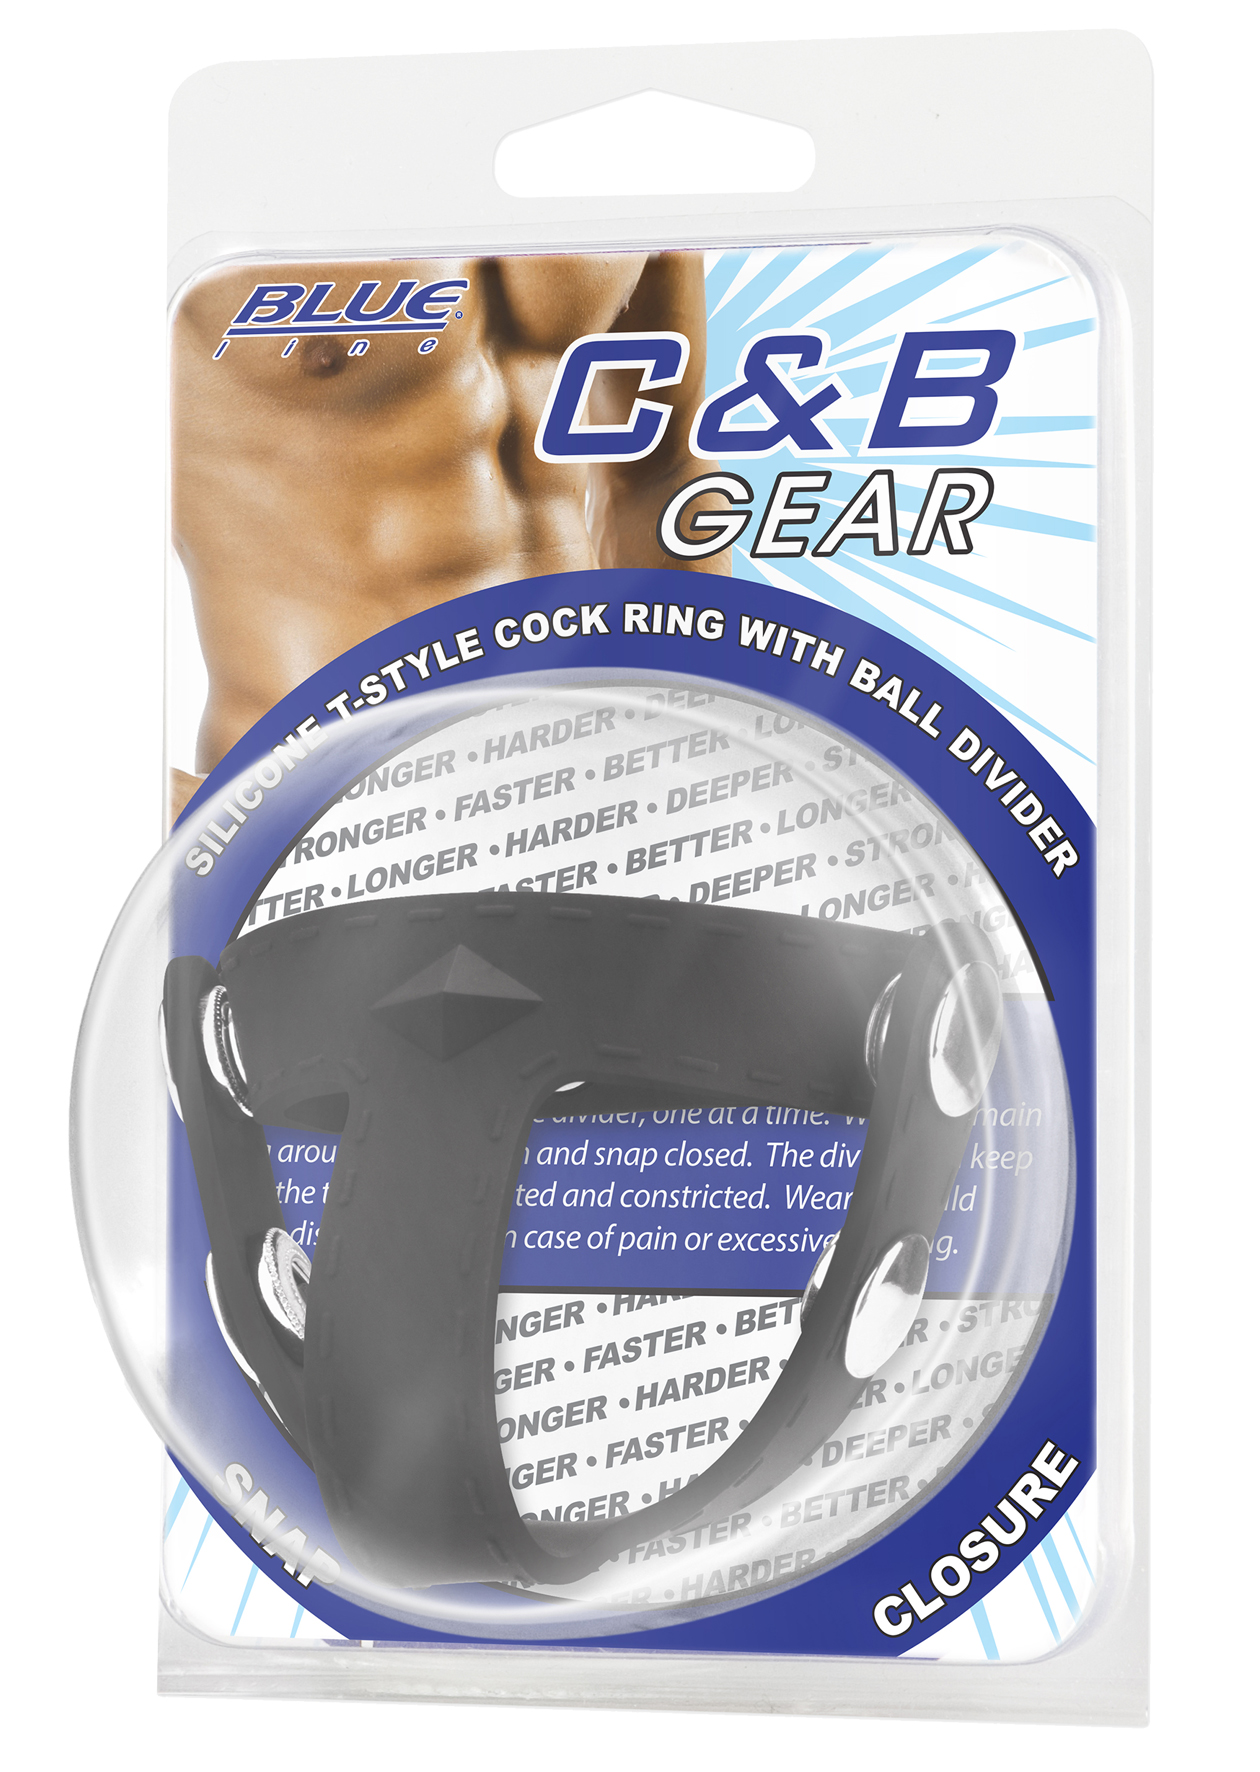 BLUE LINE C&B GEAR Silicone T-style Cock Ring With Ball Divider